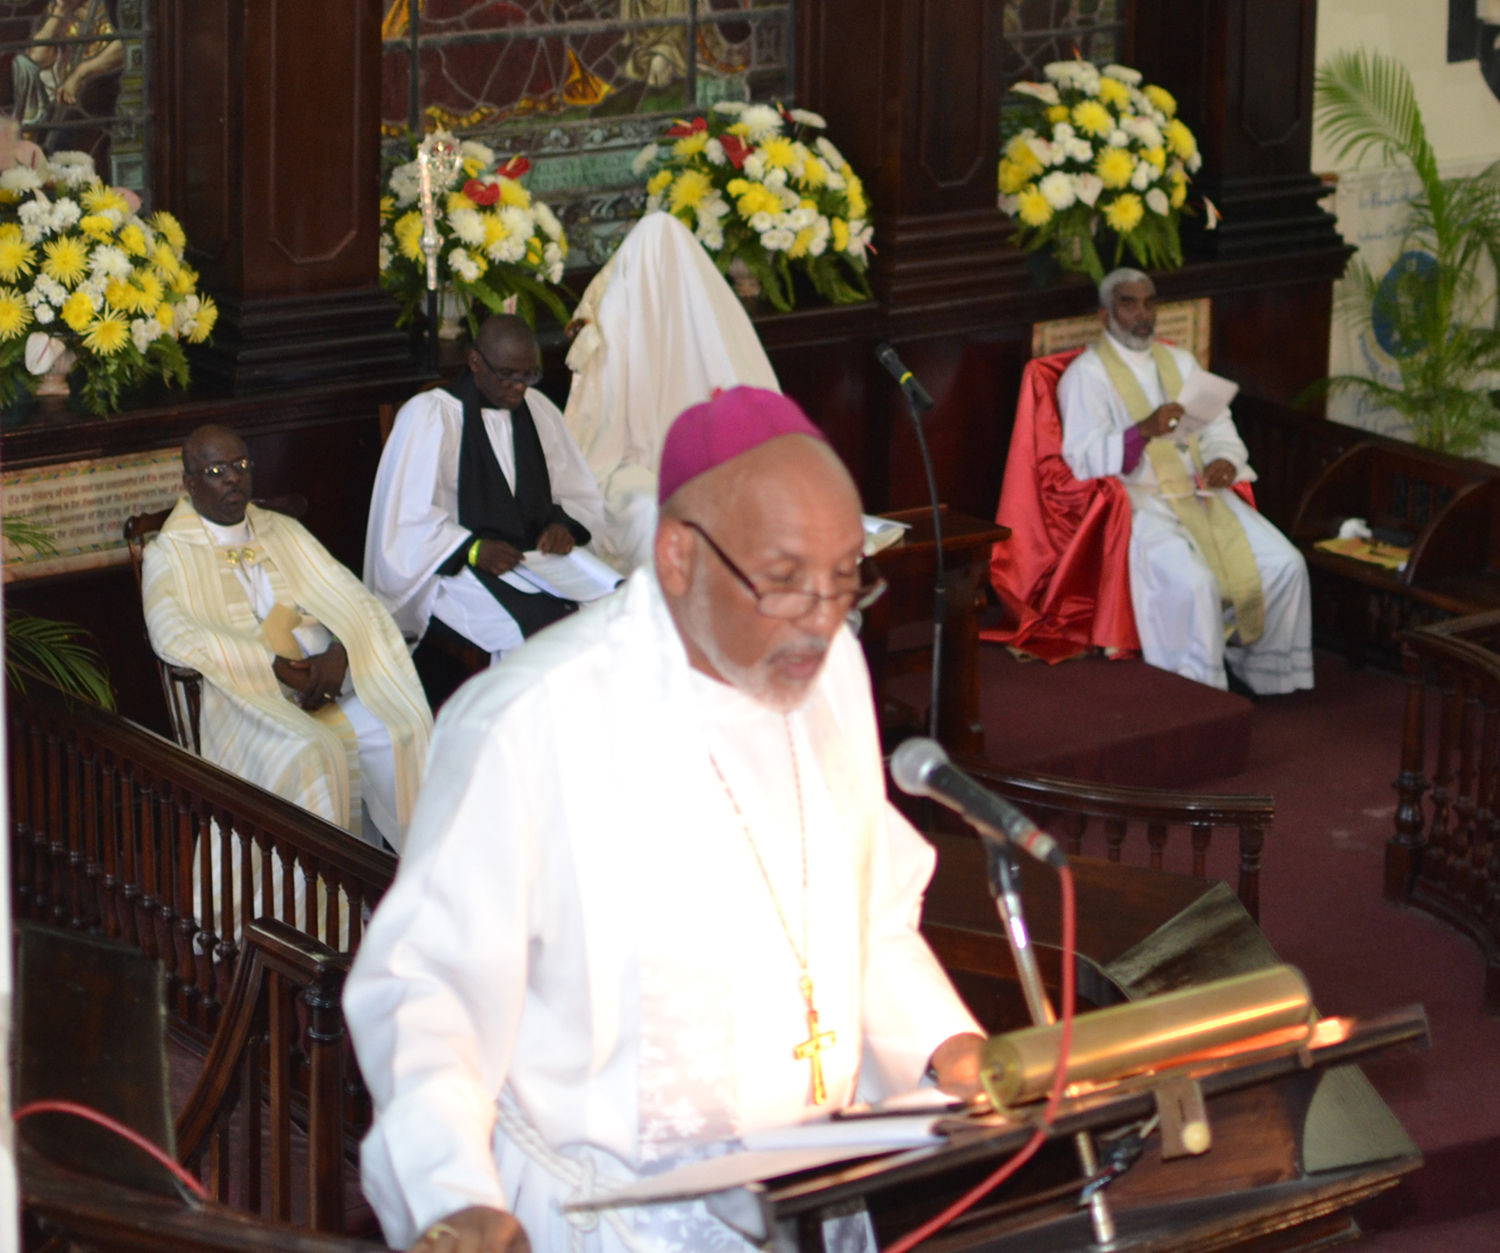 Sermon preached at the 146th Synod of the Church in Jamaica and the Cayman Islands, held in the St. James’ Parish Church, on March 29, 2016.